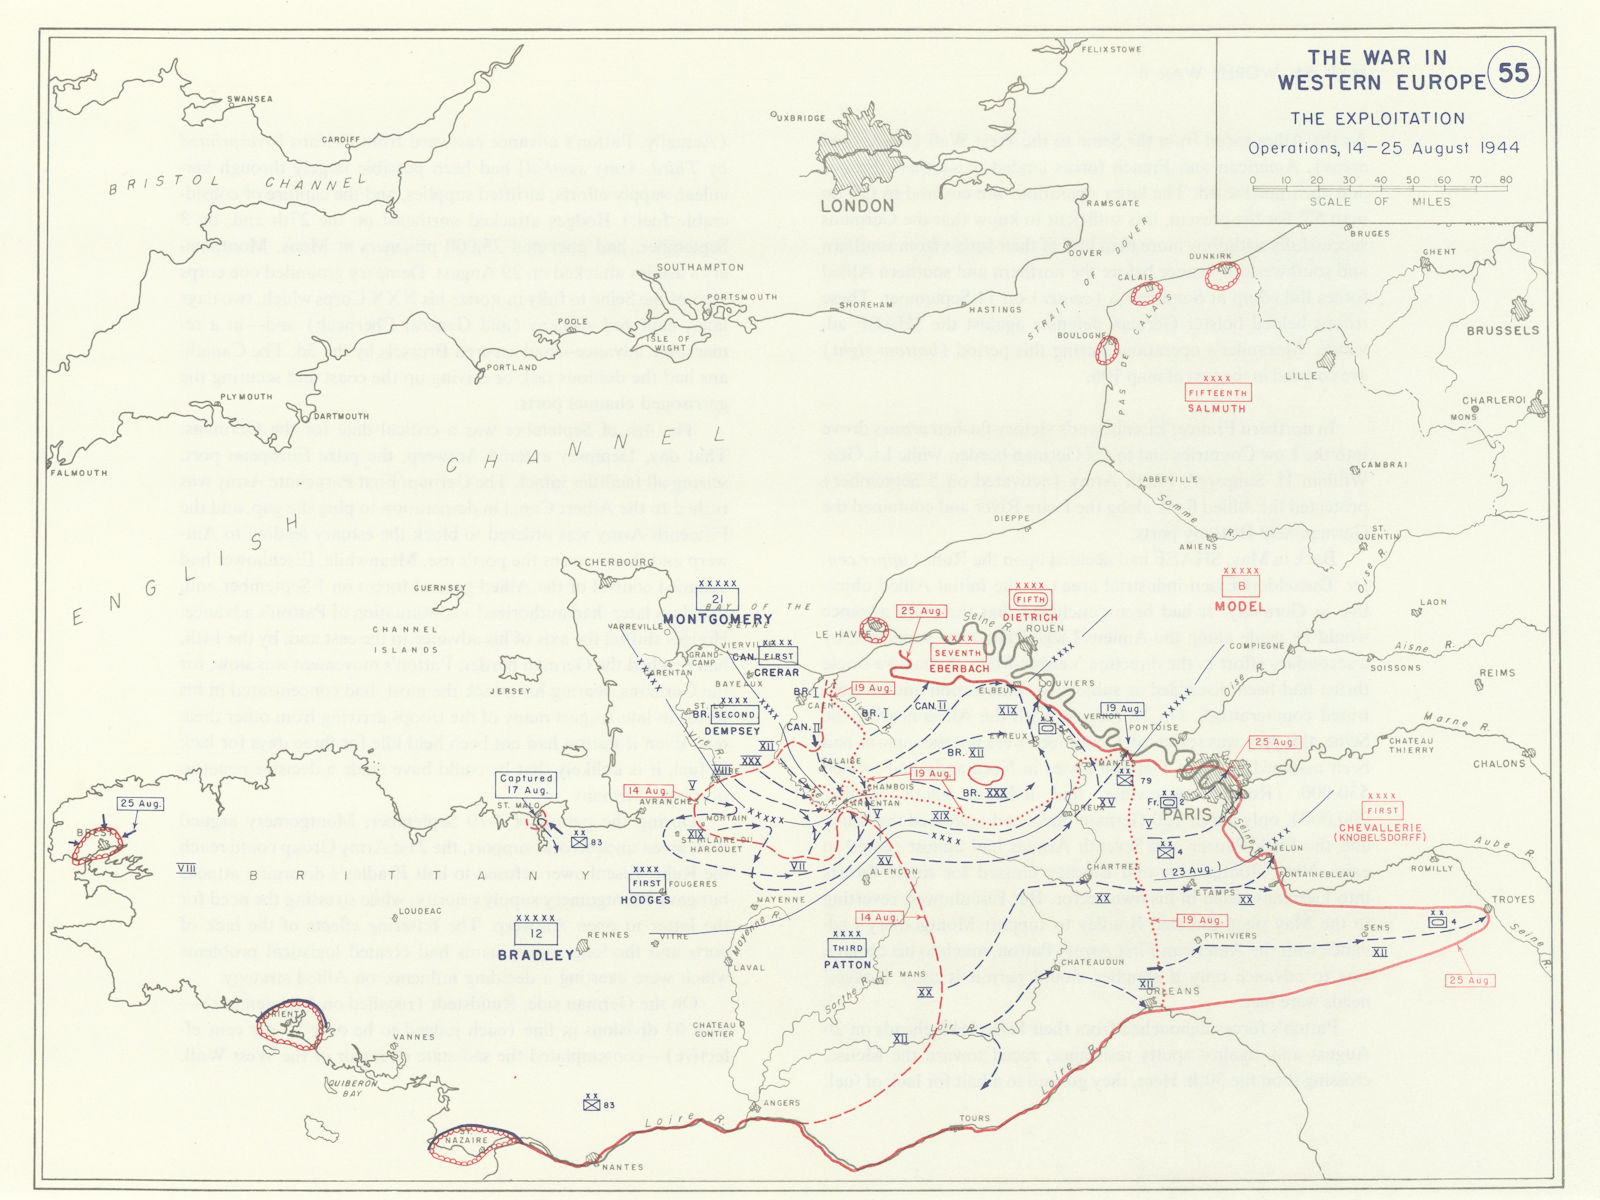 World War 2. Liberation of France 14-25 August 1944. The exploitation 1959 map